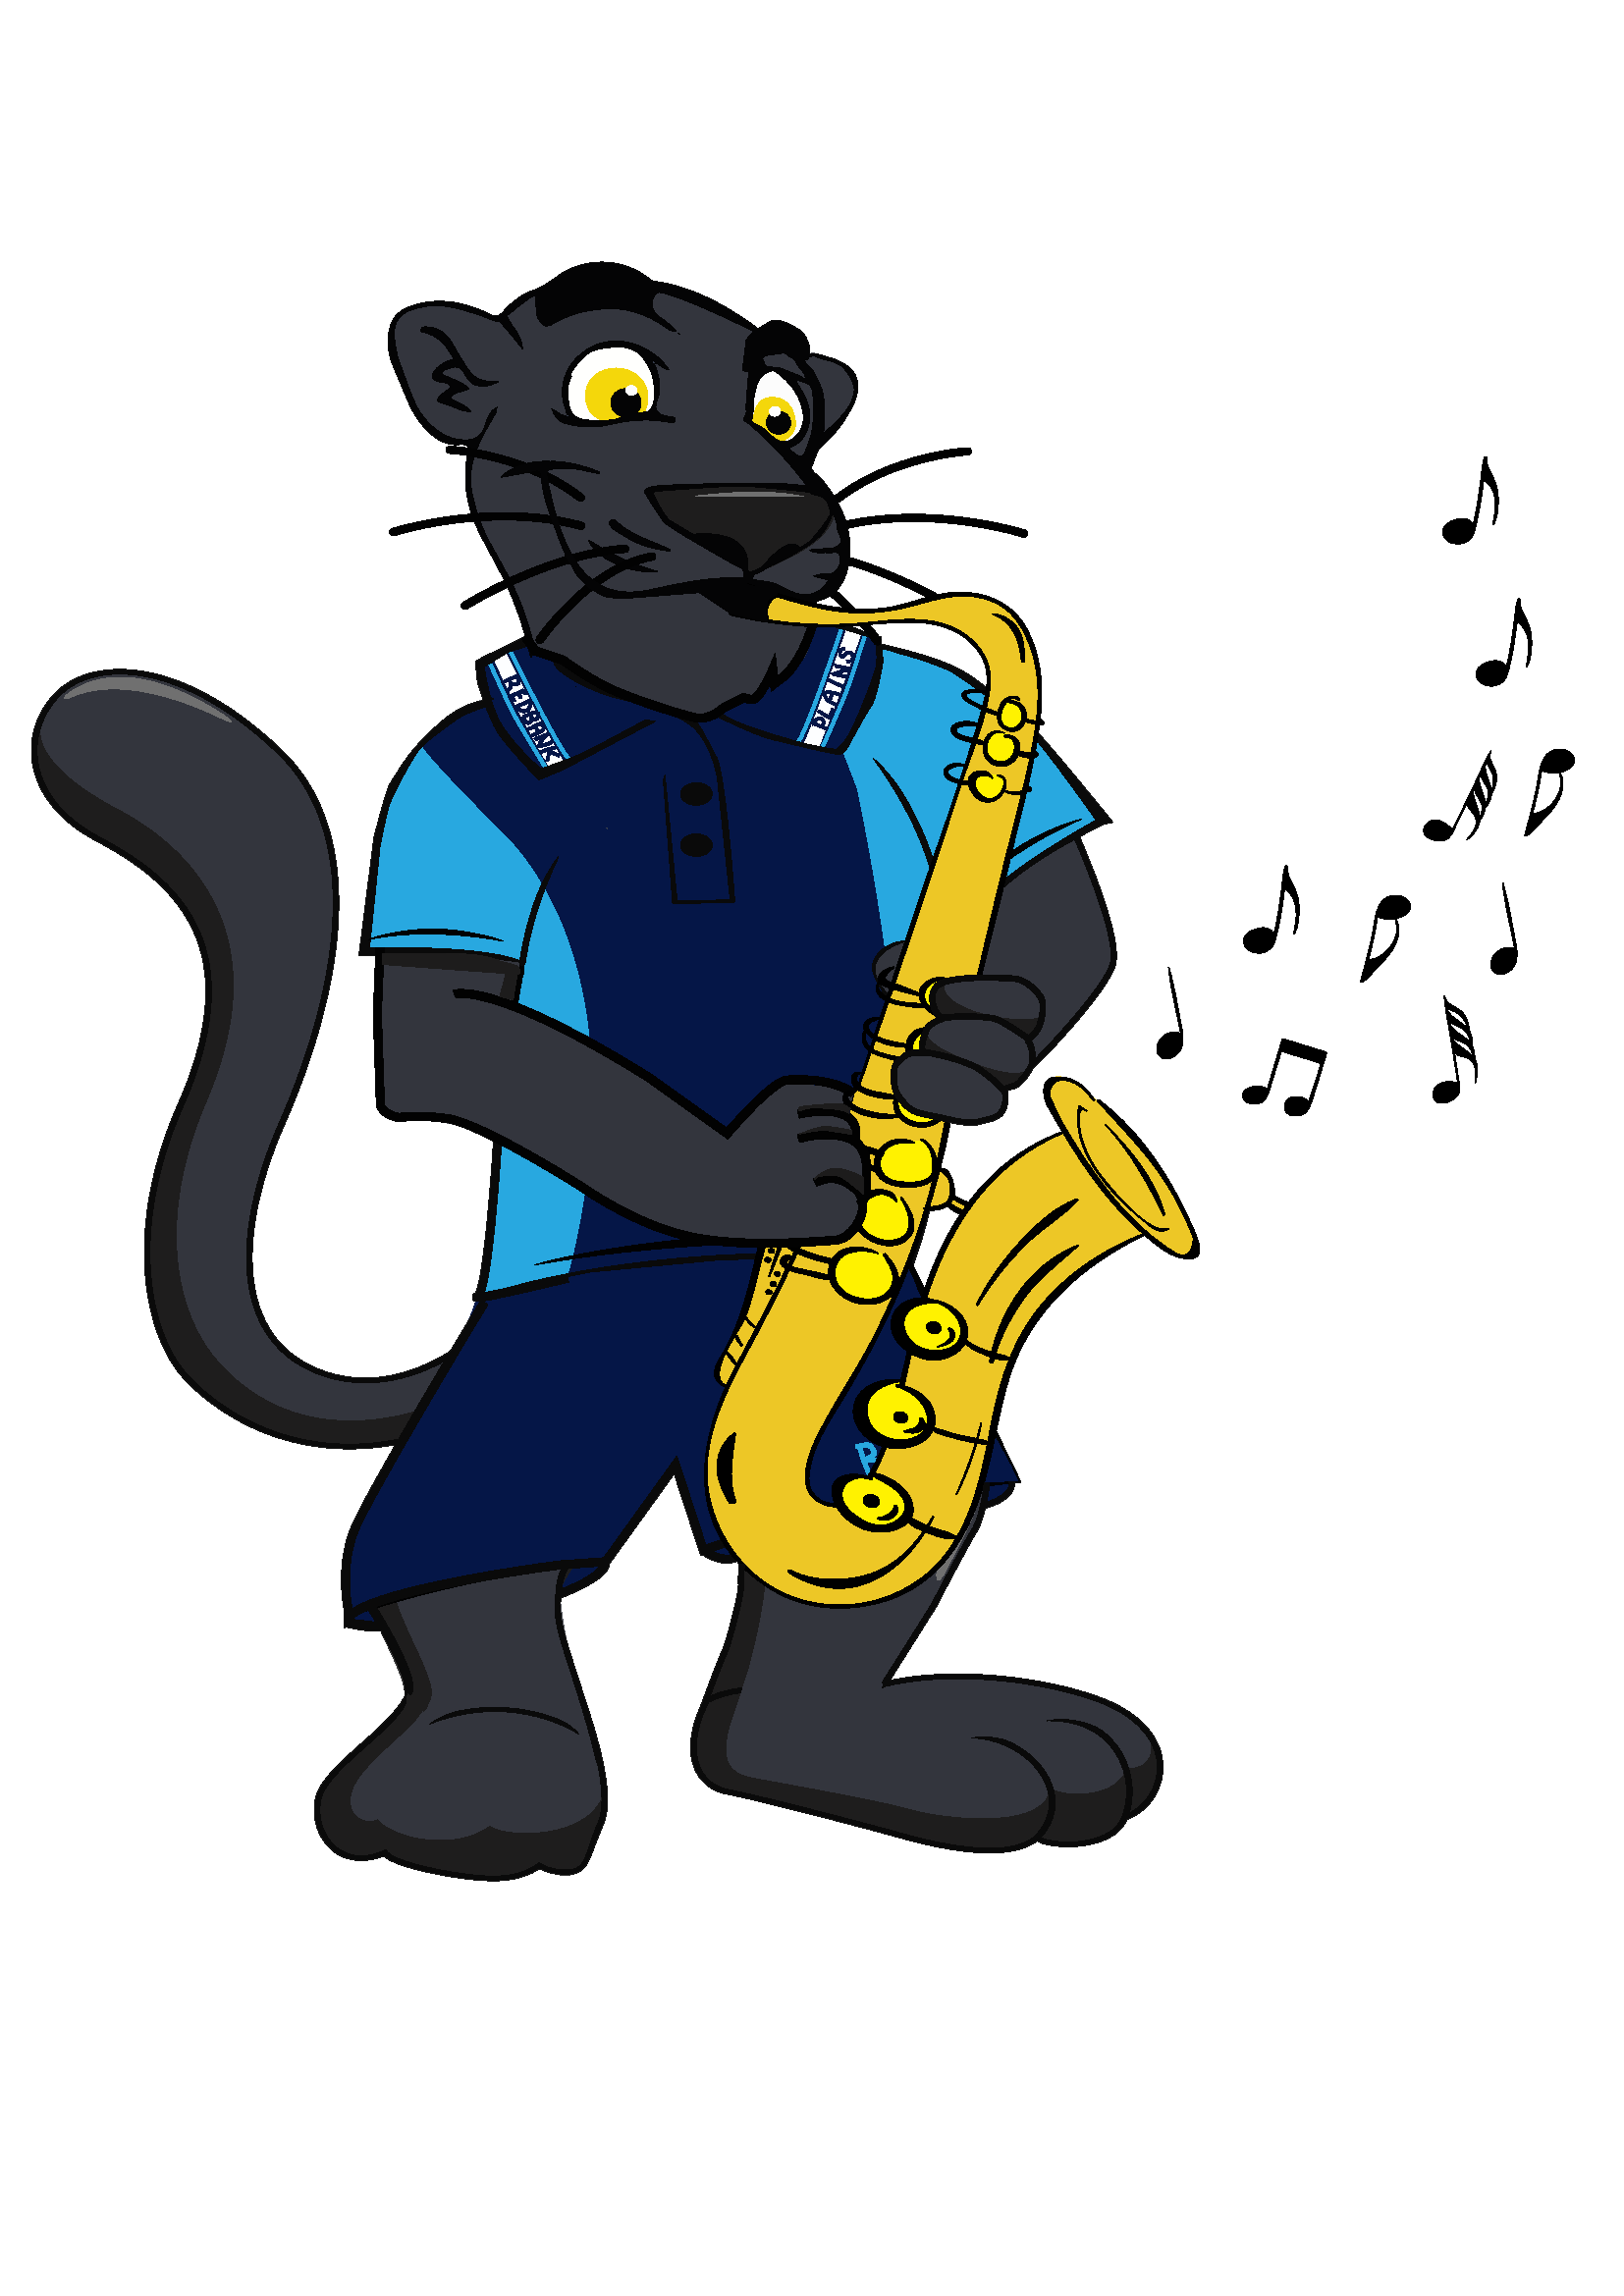 instruments clipart extra curricular